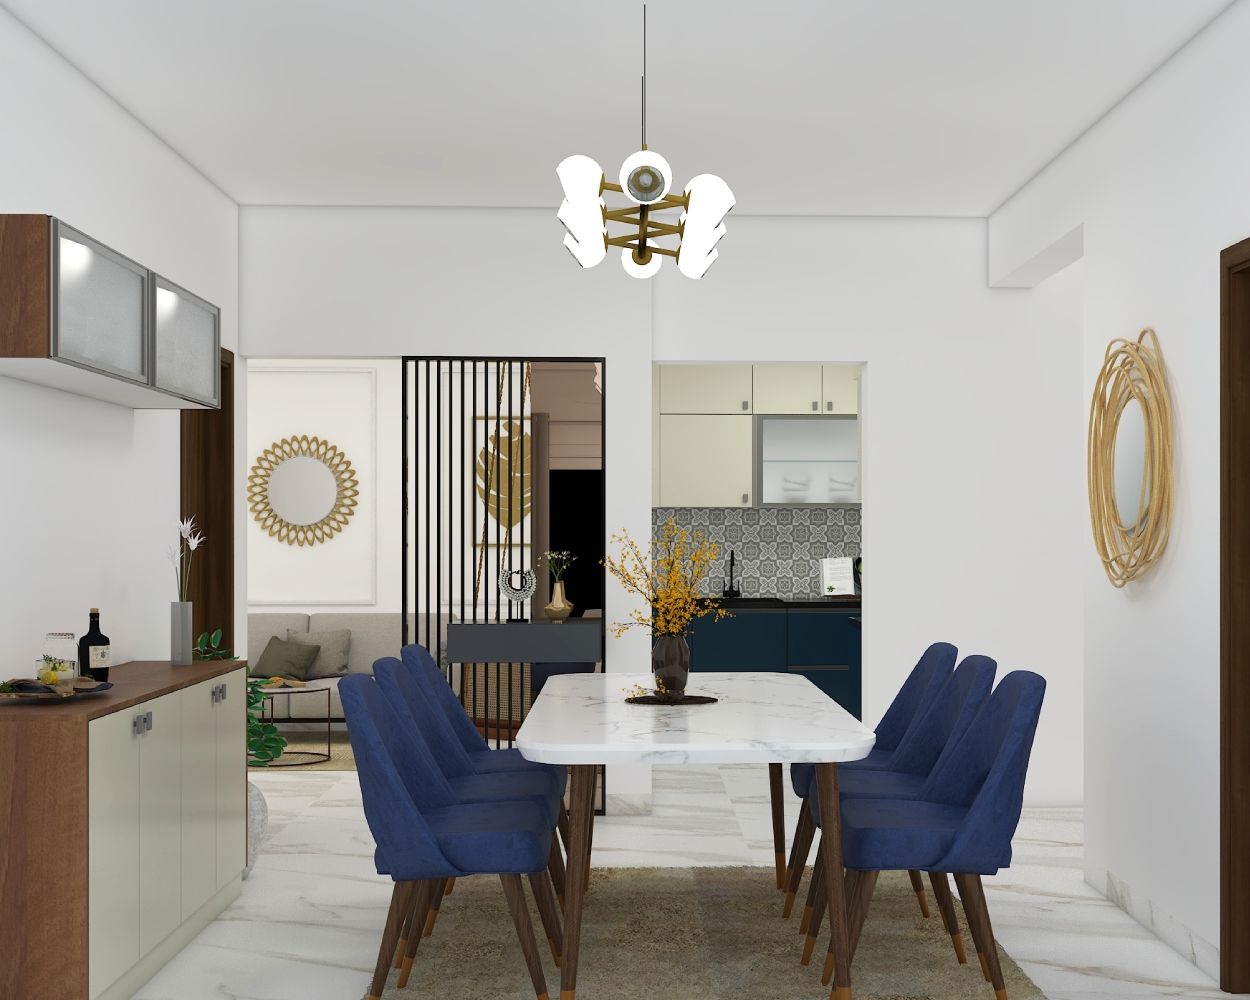 Contemporary 6-Seater Dining Room Design With Blue Chairs